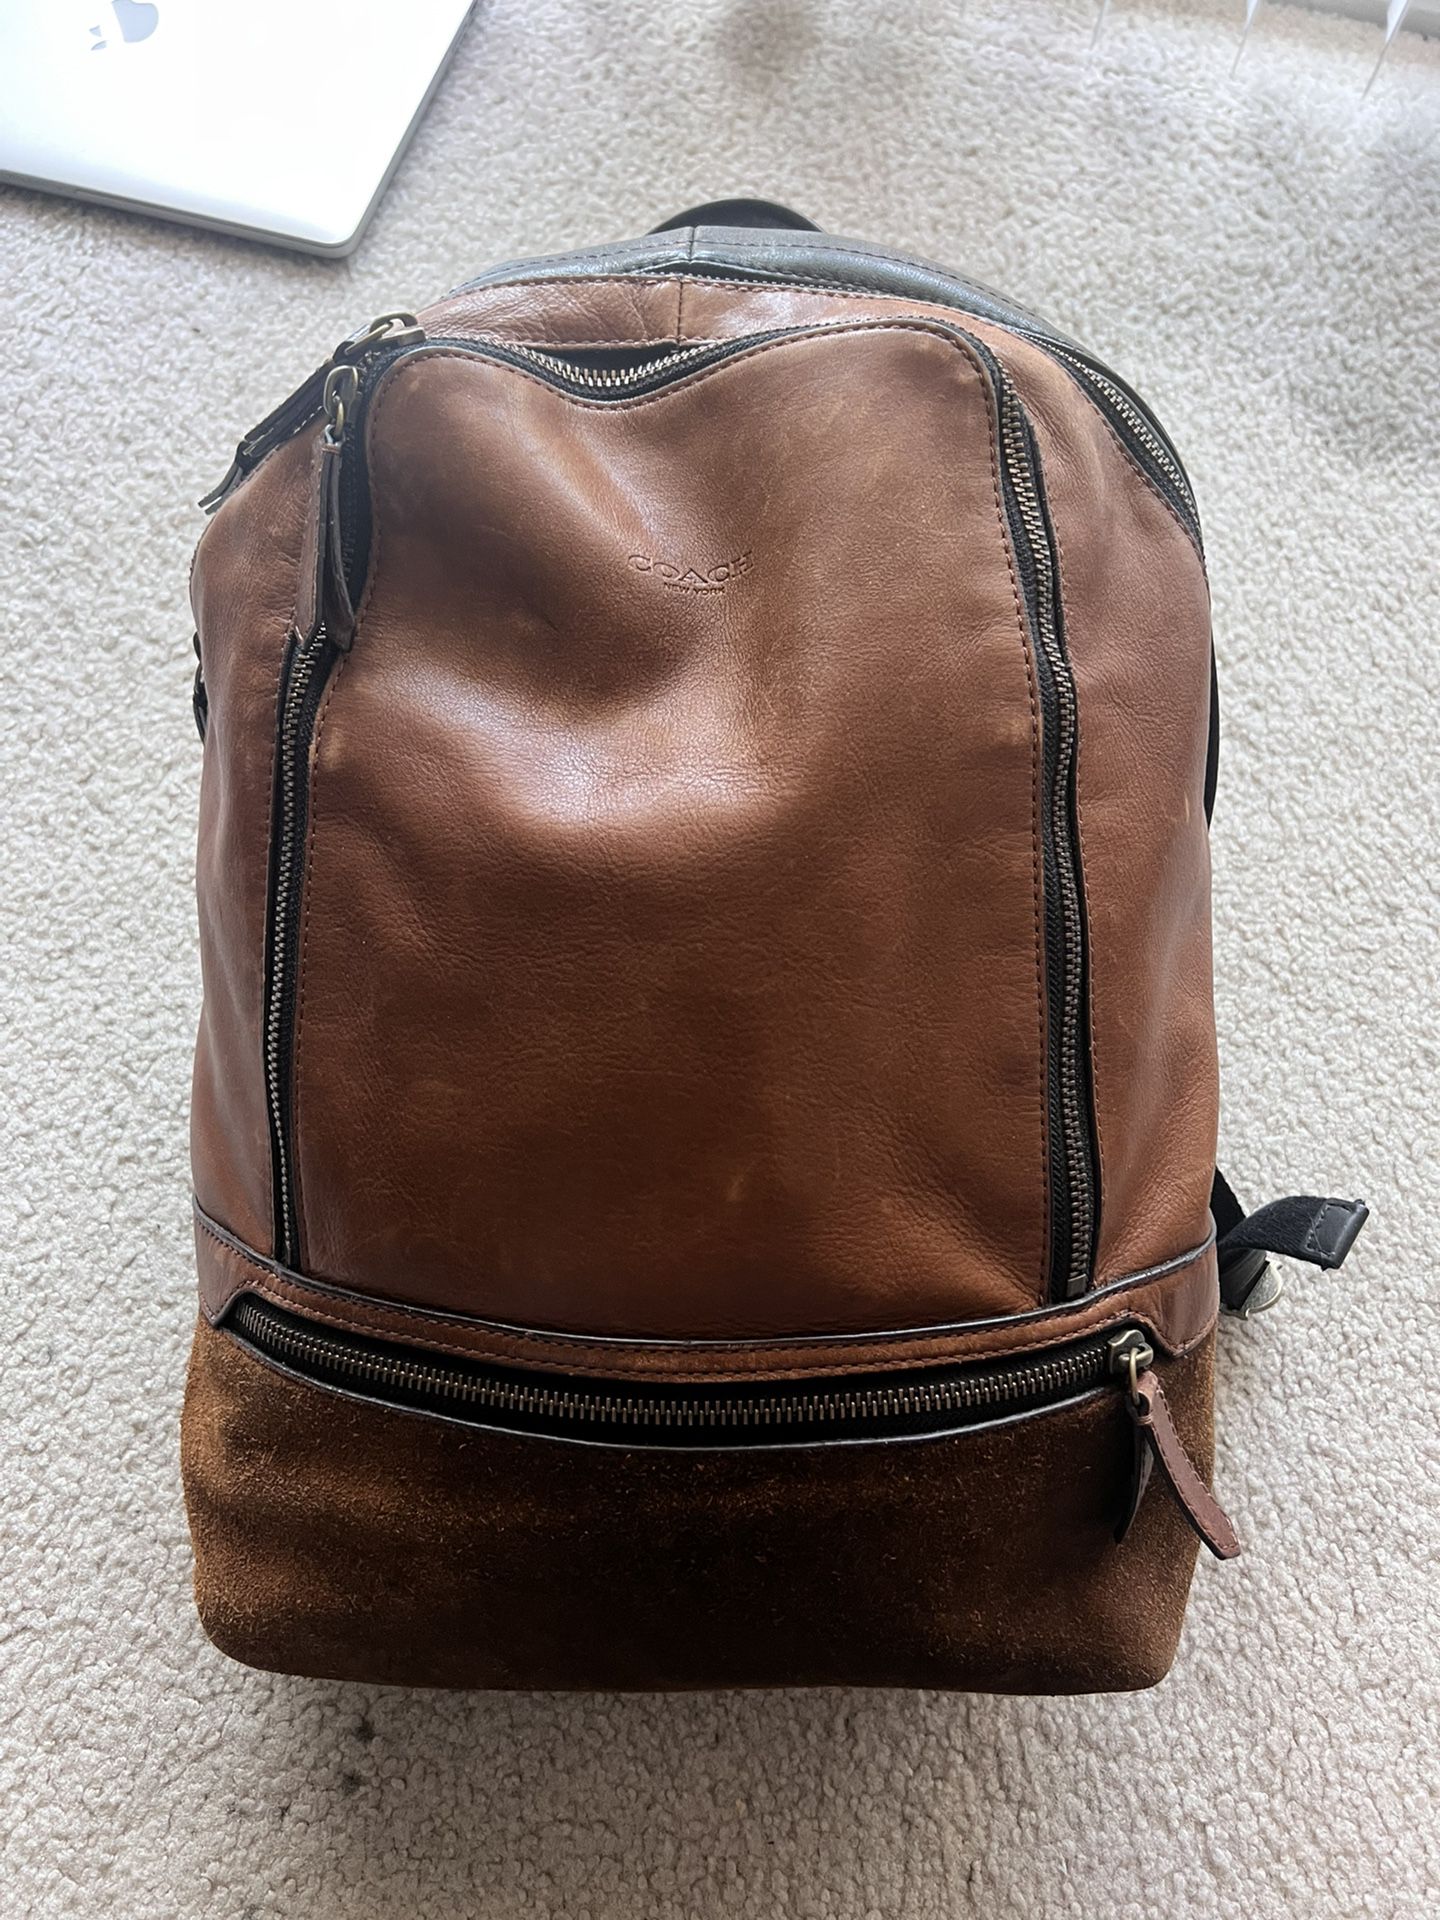 Coach Leather Backpack For Men